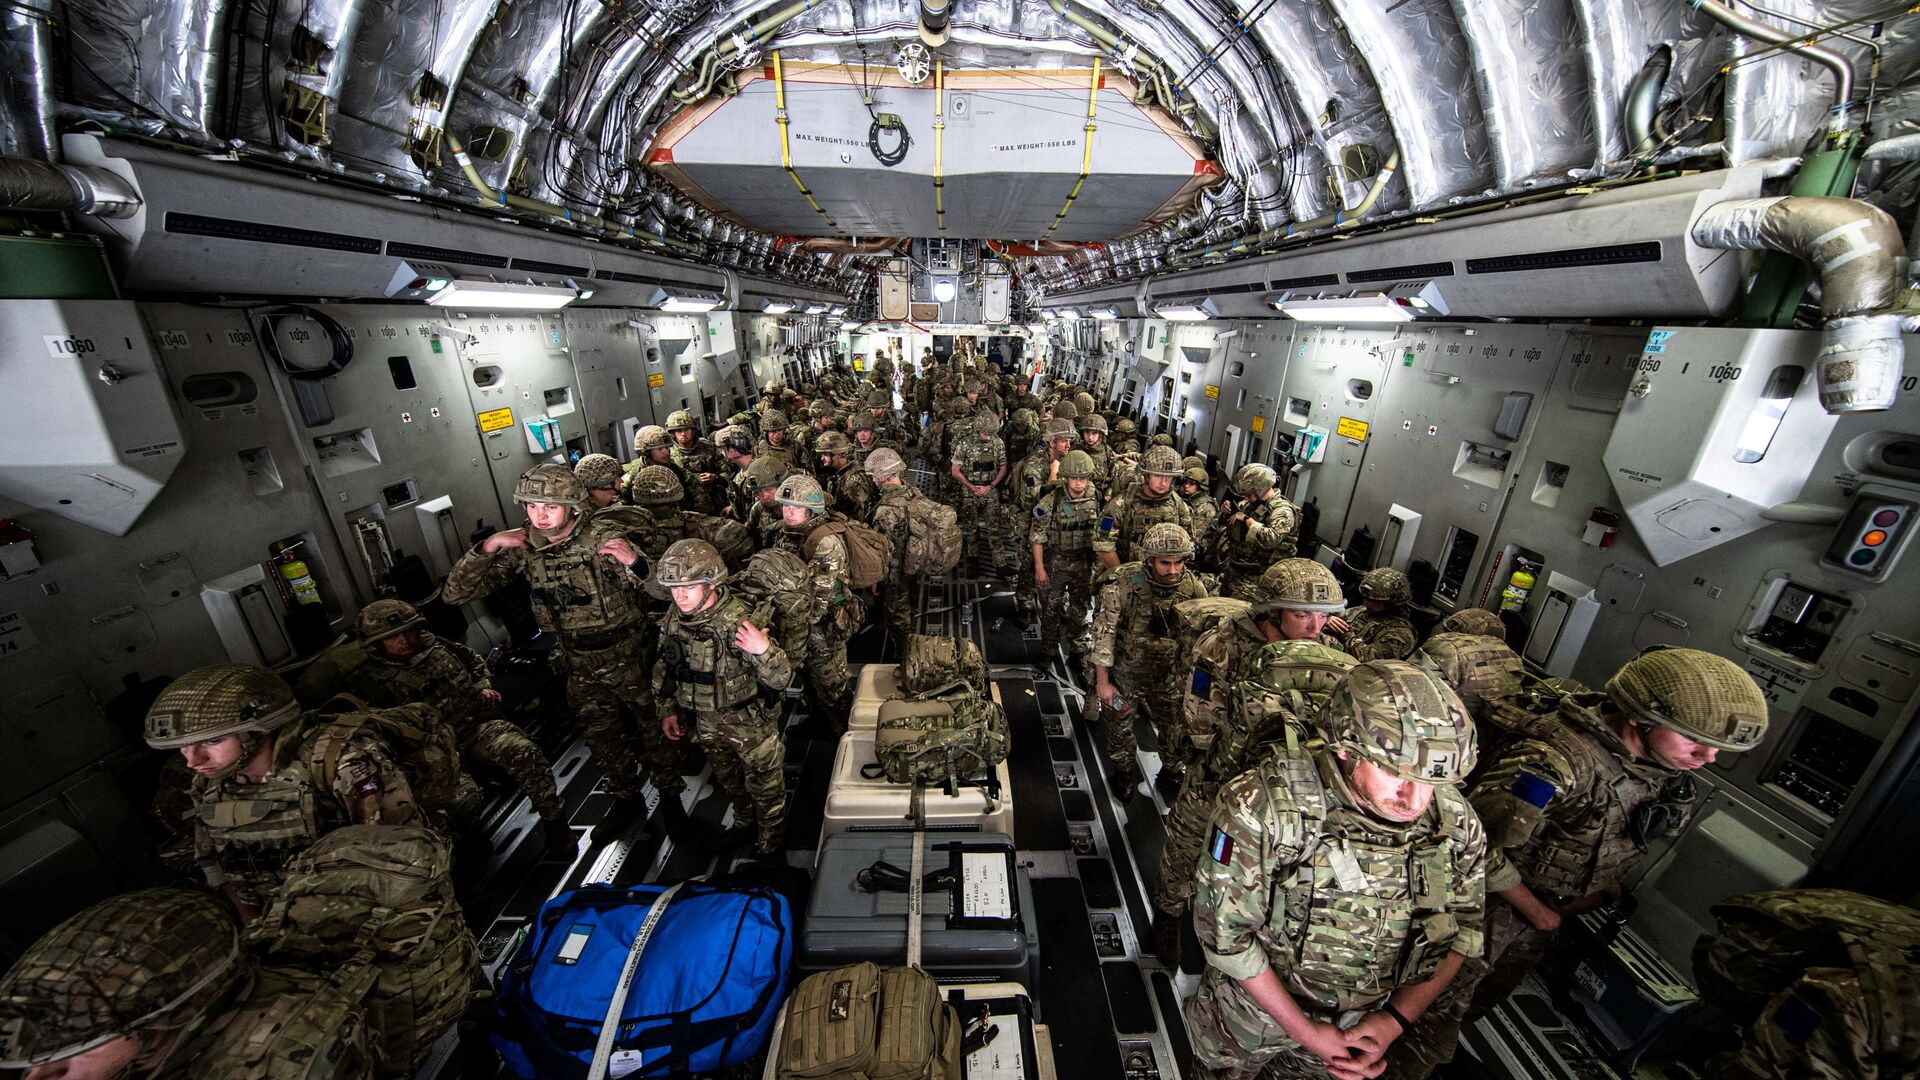 British Forces from 16 Air Assault Brigade arrive in Kabul, Afghanistan, to provide support to British nationals leaving the country, as part of Operation PITTING after Taliban insurgents took control of the presidential palace in Kabul, August 15, 2021. Leading Hand Ben Shread/RAF/UK Ministry of Defence 2021/Handout via REUTERS   THIS IMAGE HAS BEEN SUPPLIED BY A THIRD PARTY. - Sputnik International, 1920, 05.09.2021